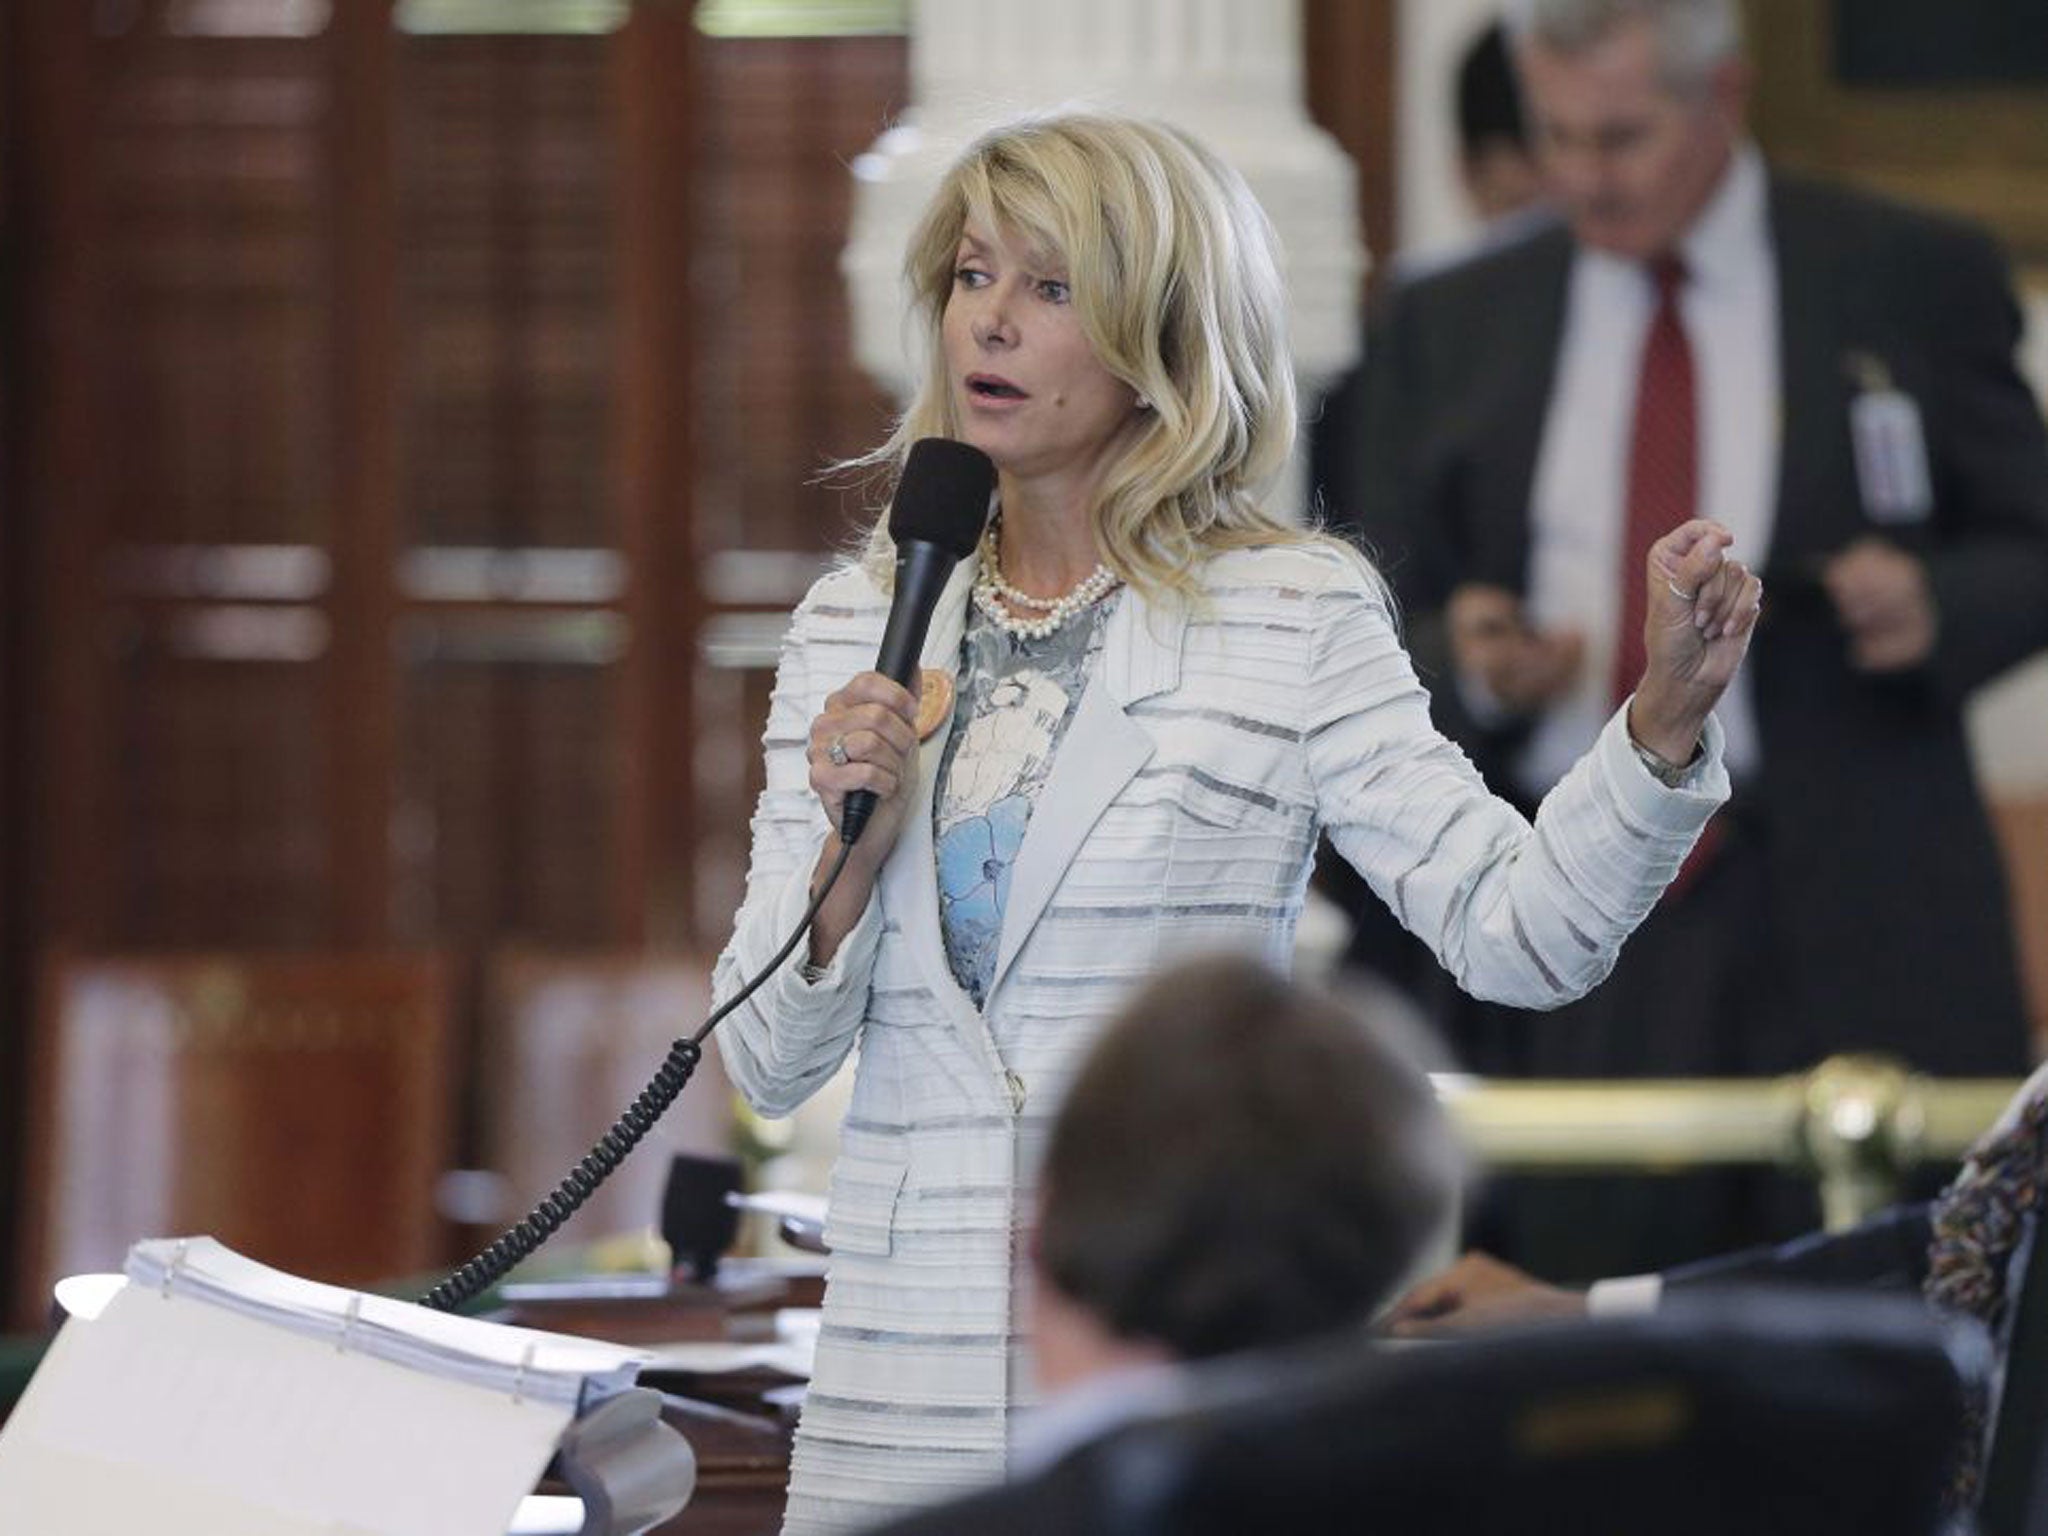 Democratic senator, Wendy Davis, made headlines trying to block the law with a 24-hour-long filibuster